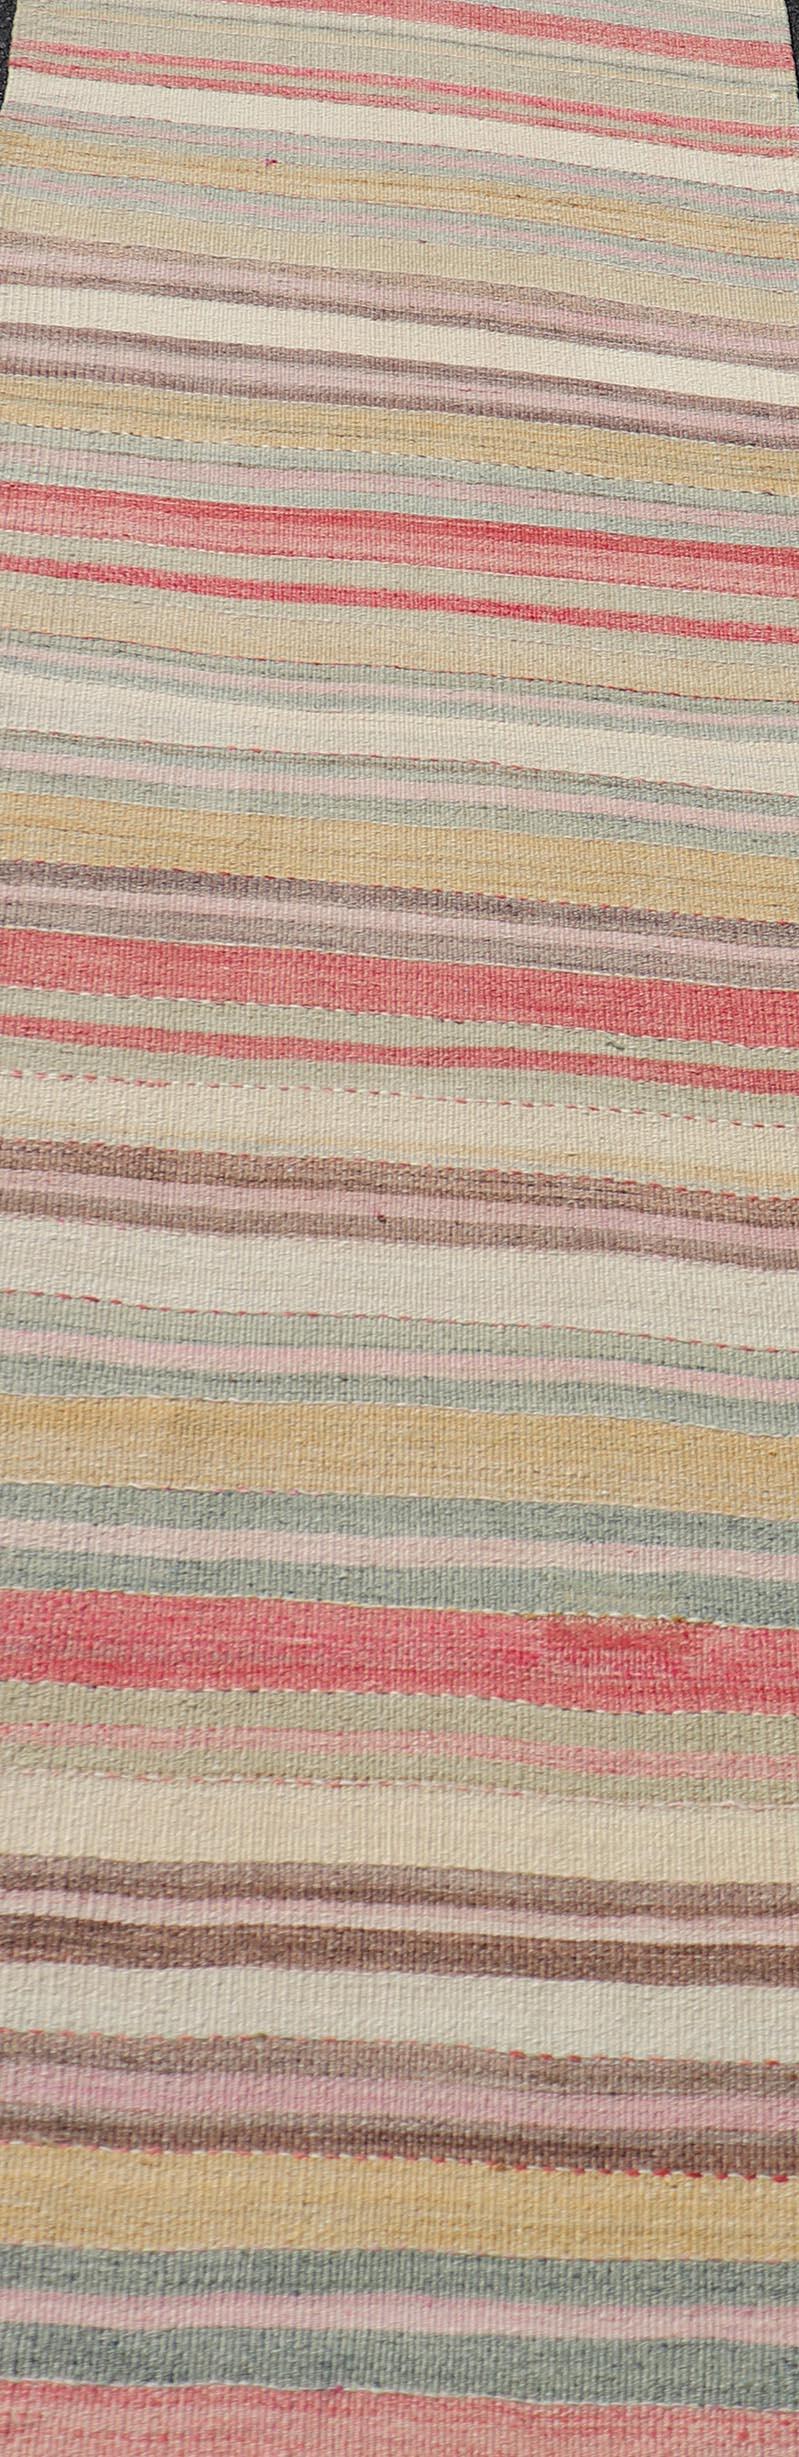 Wool Colorful Vintage Turkish Kilim Runner with Stripes and Multi Colors  For Sale